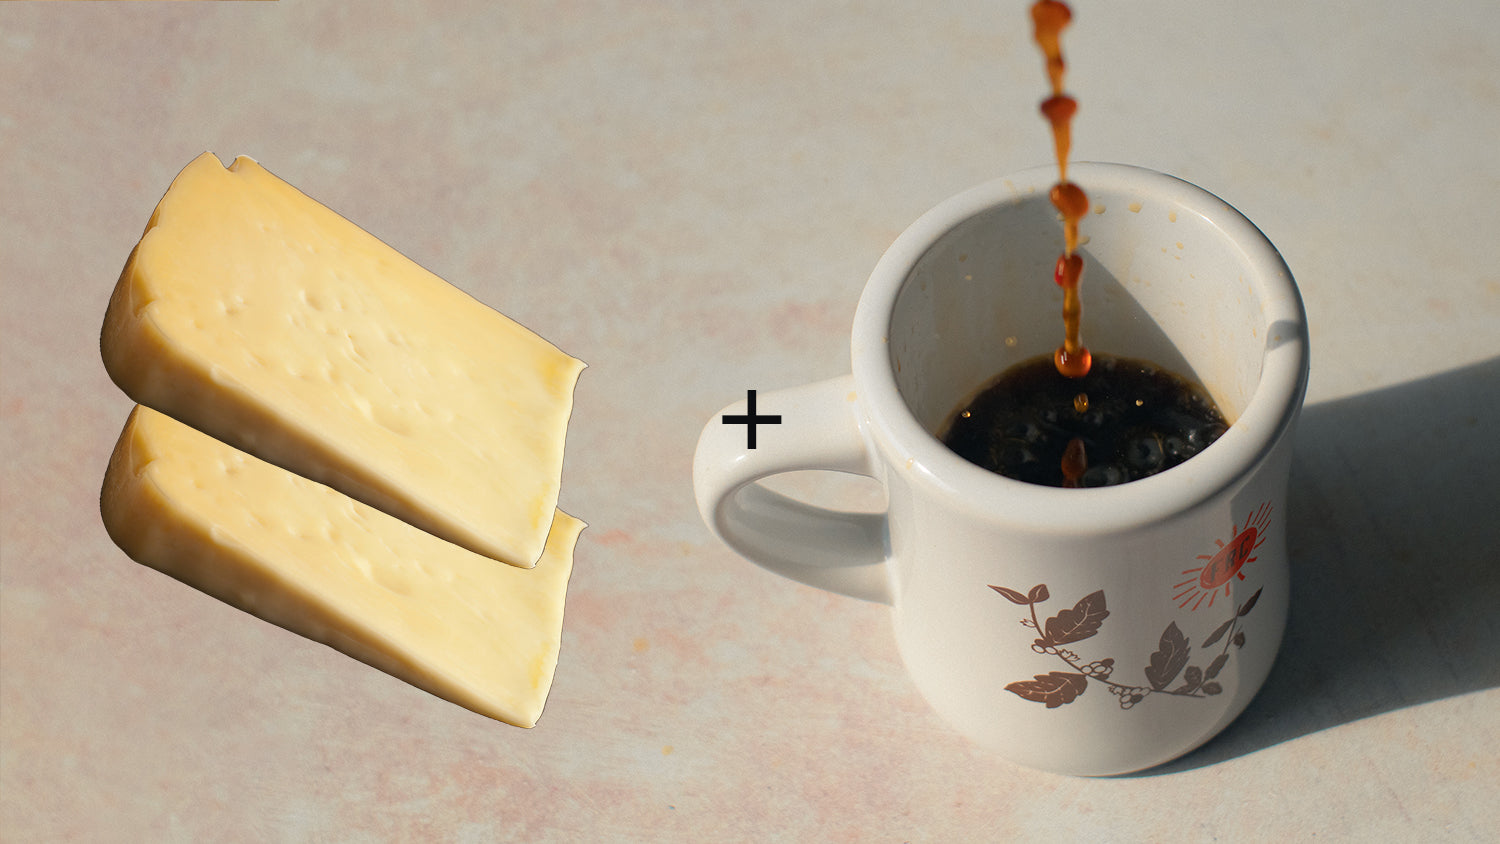 Two wedges of cheese and a coffee mug.